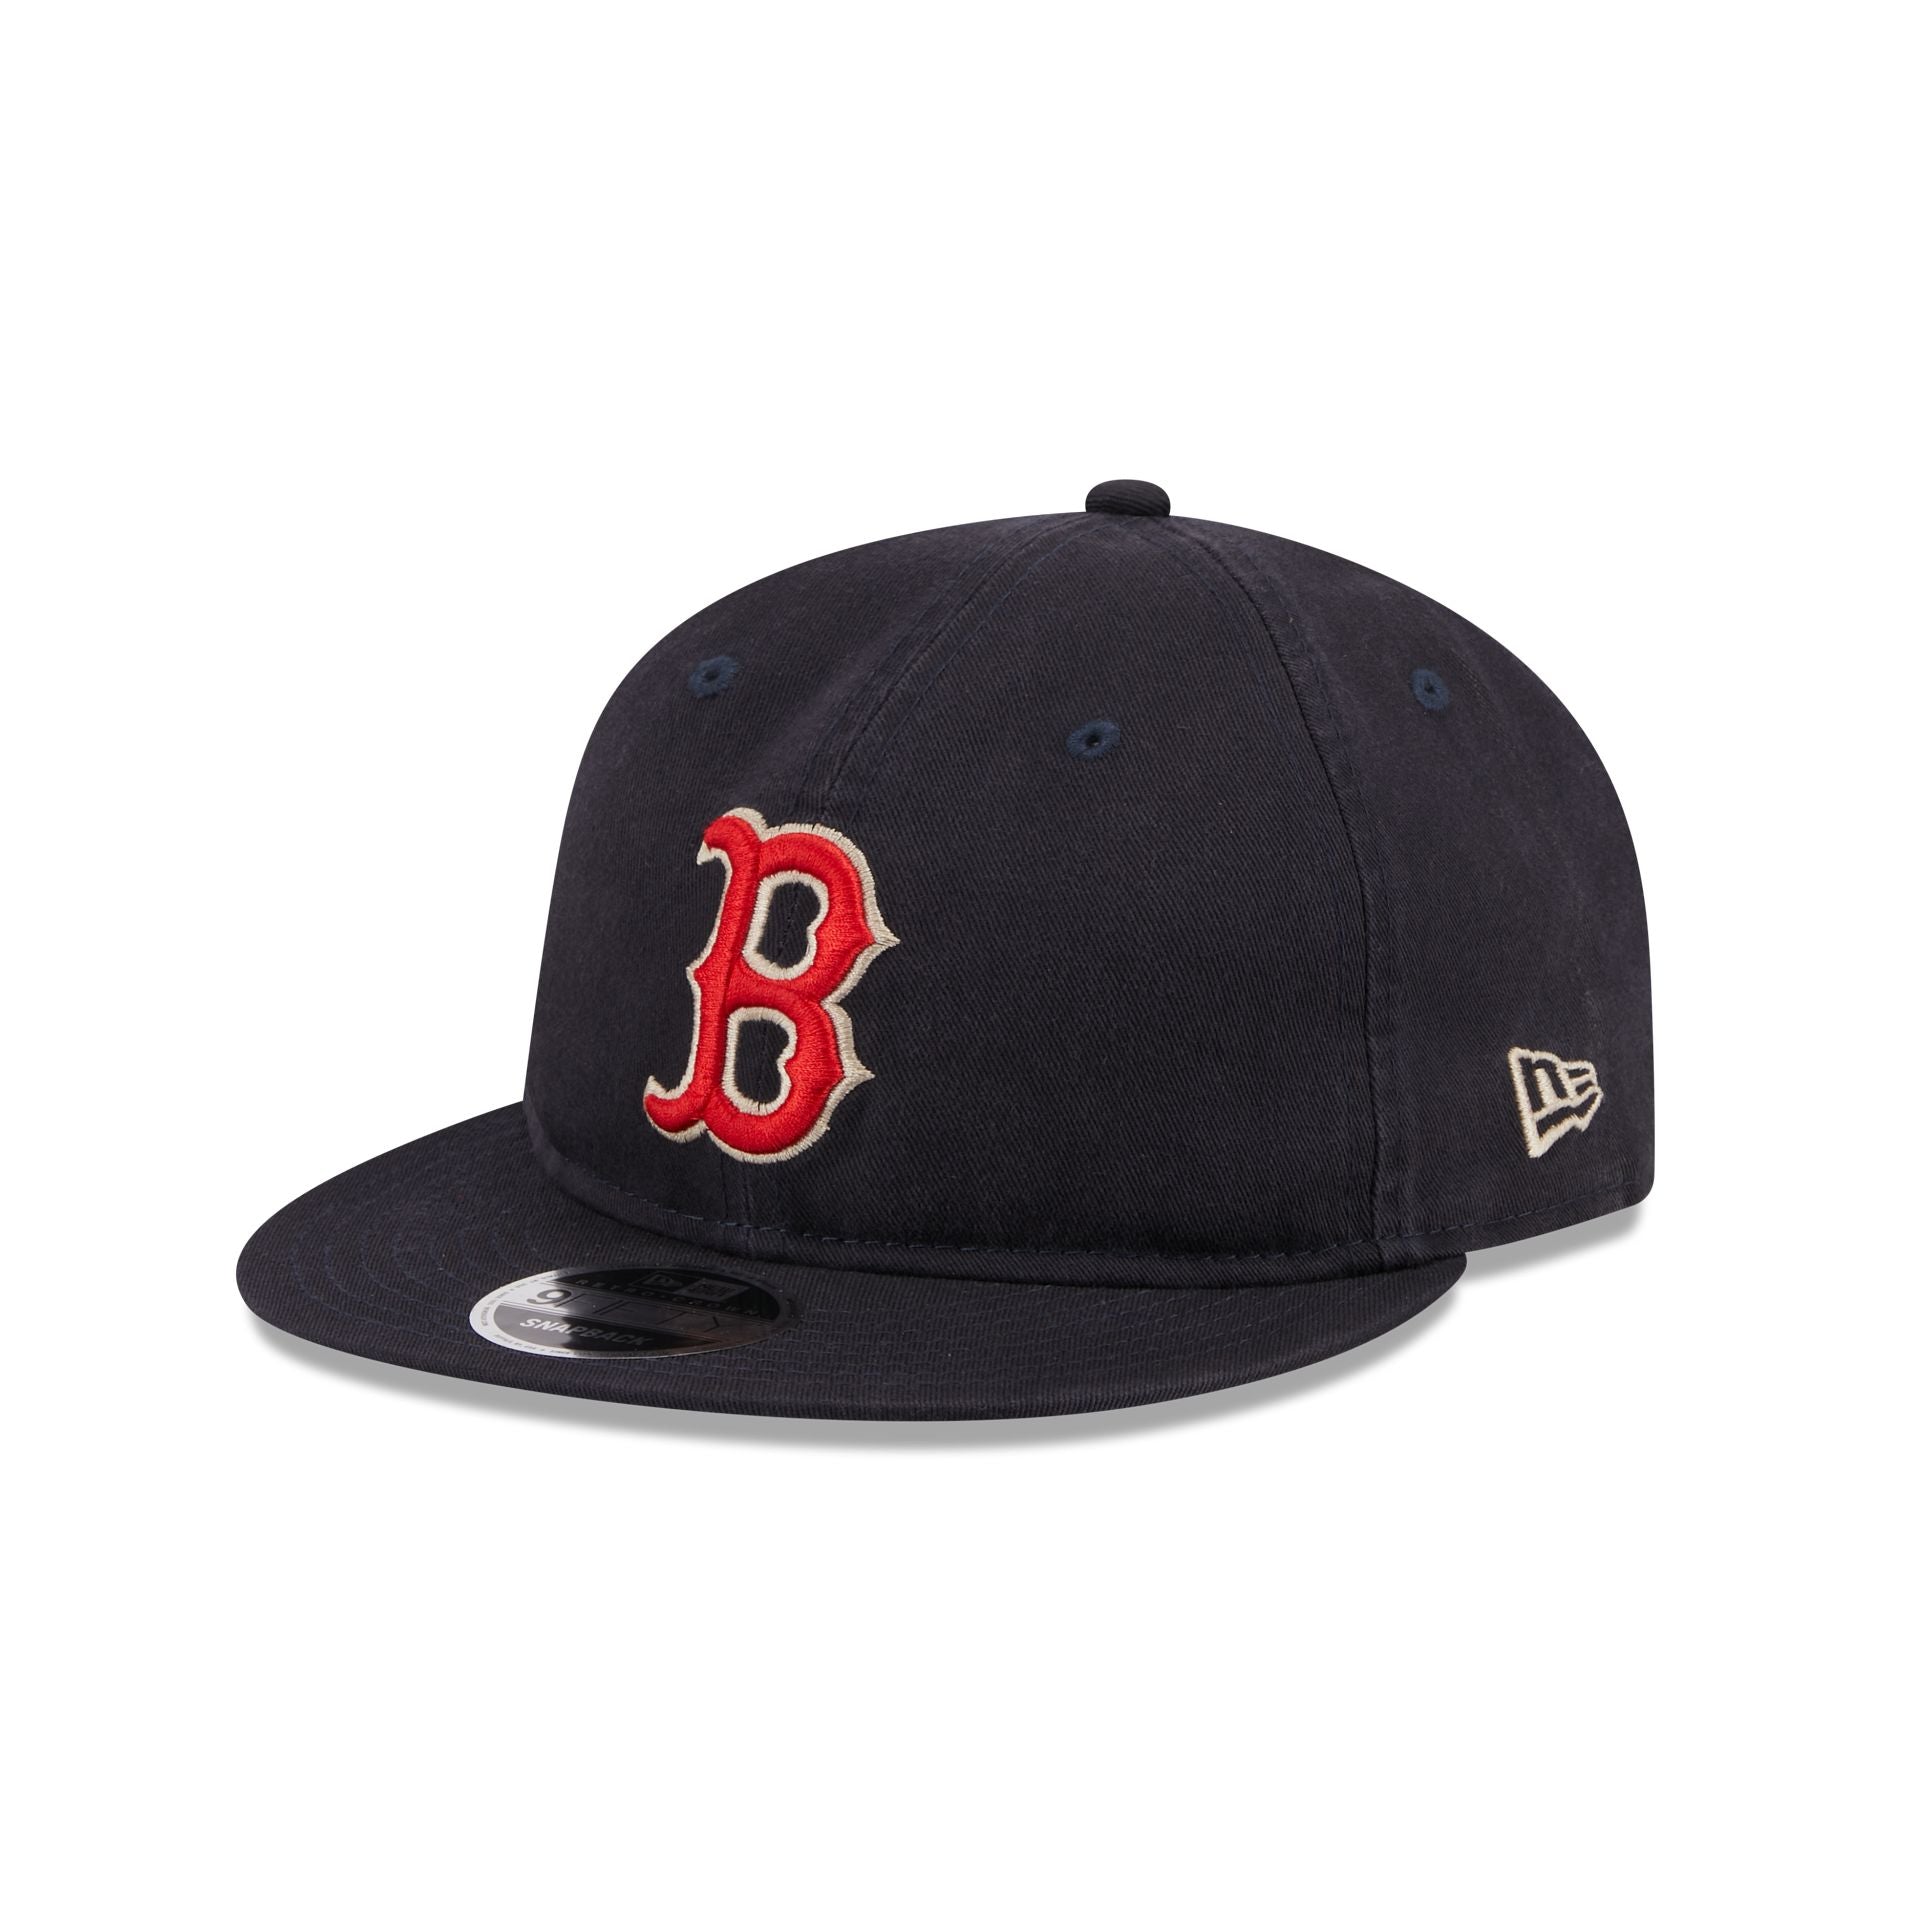 Boston Red Sox Shadow Pack Retro Crown 9FIFTY Snapback Hat, Blue, MLB by New Era